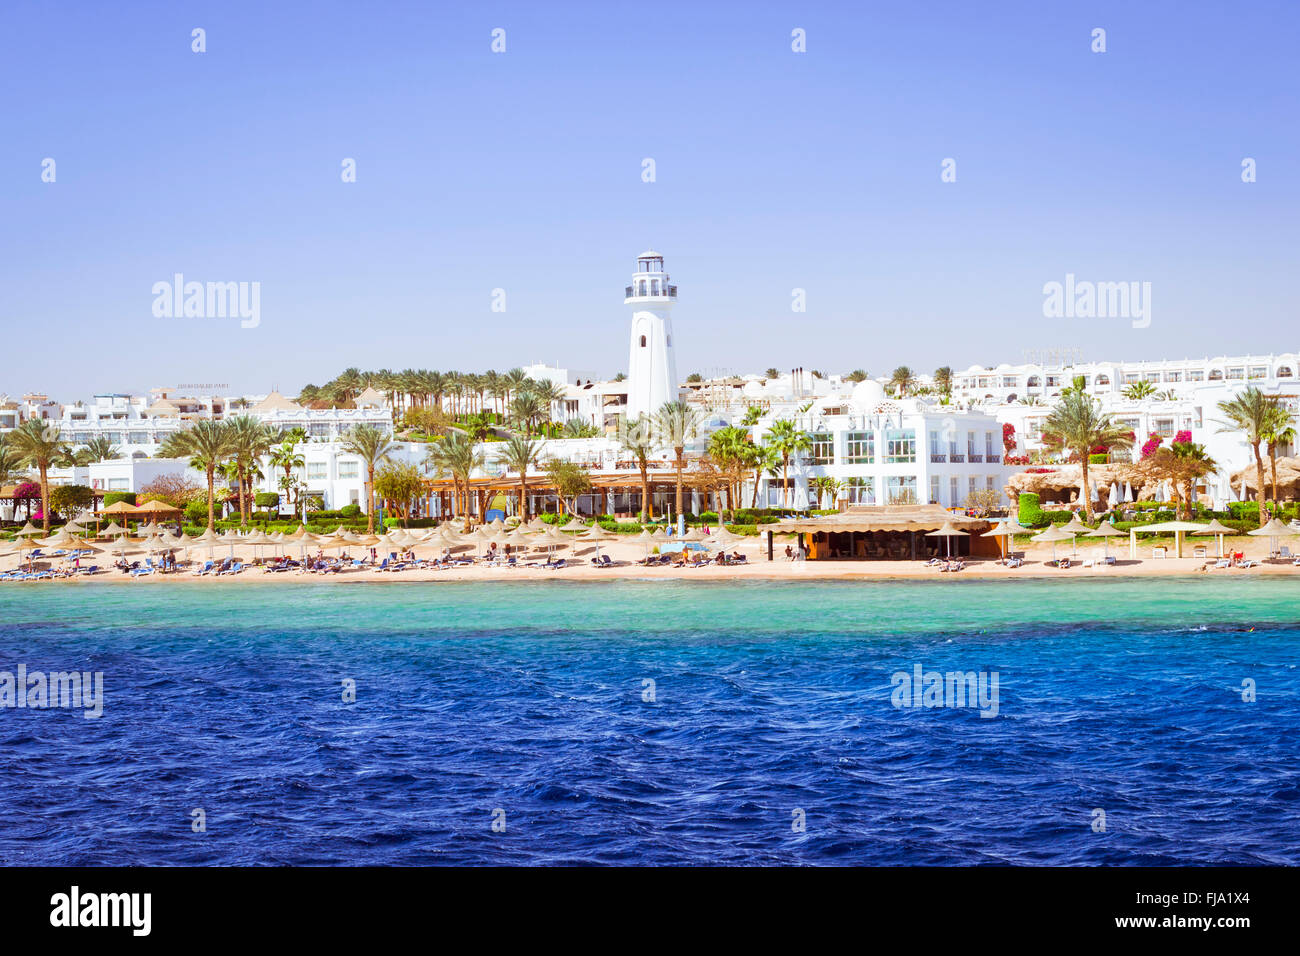 SHARM EL SHEIKH, EGYPT - FEBRUARY 25, 2014: Coastal lighthouse and hotel on beach, luxury vacation for tourists in Red sea Stock Photo